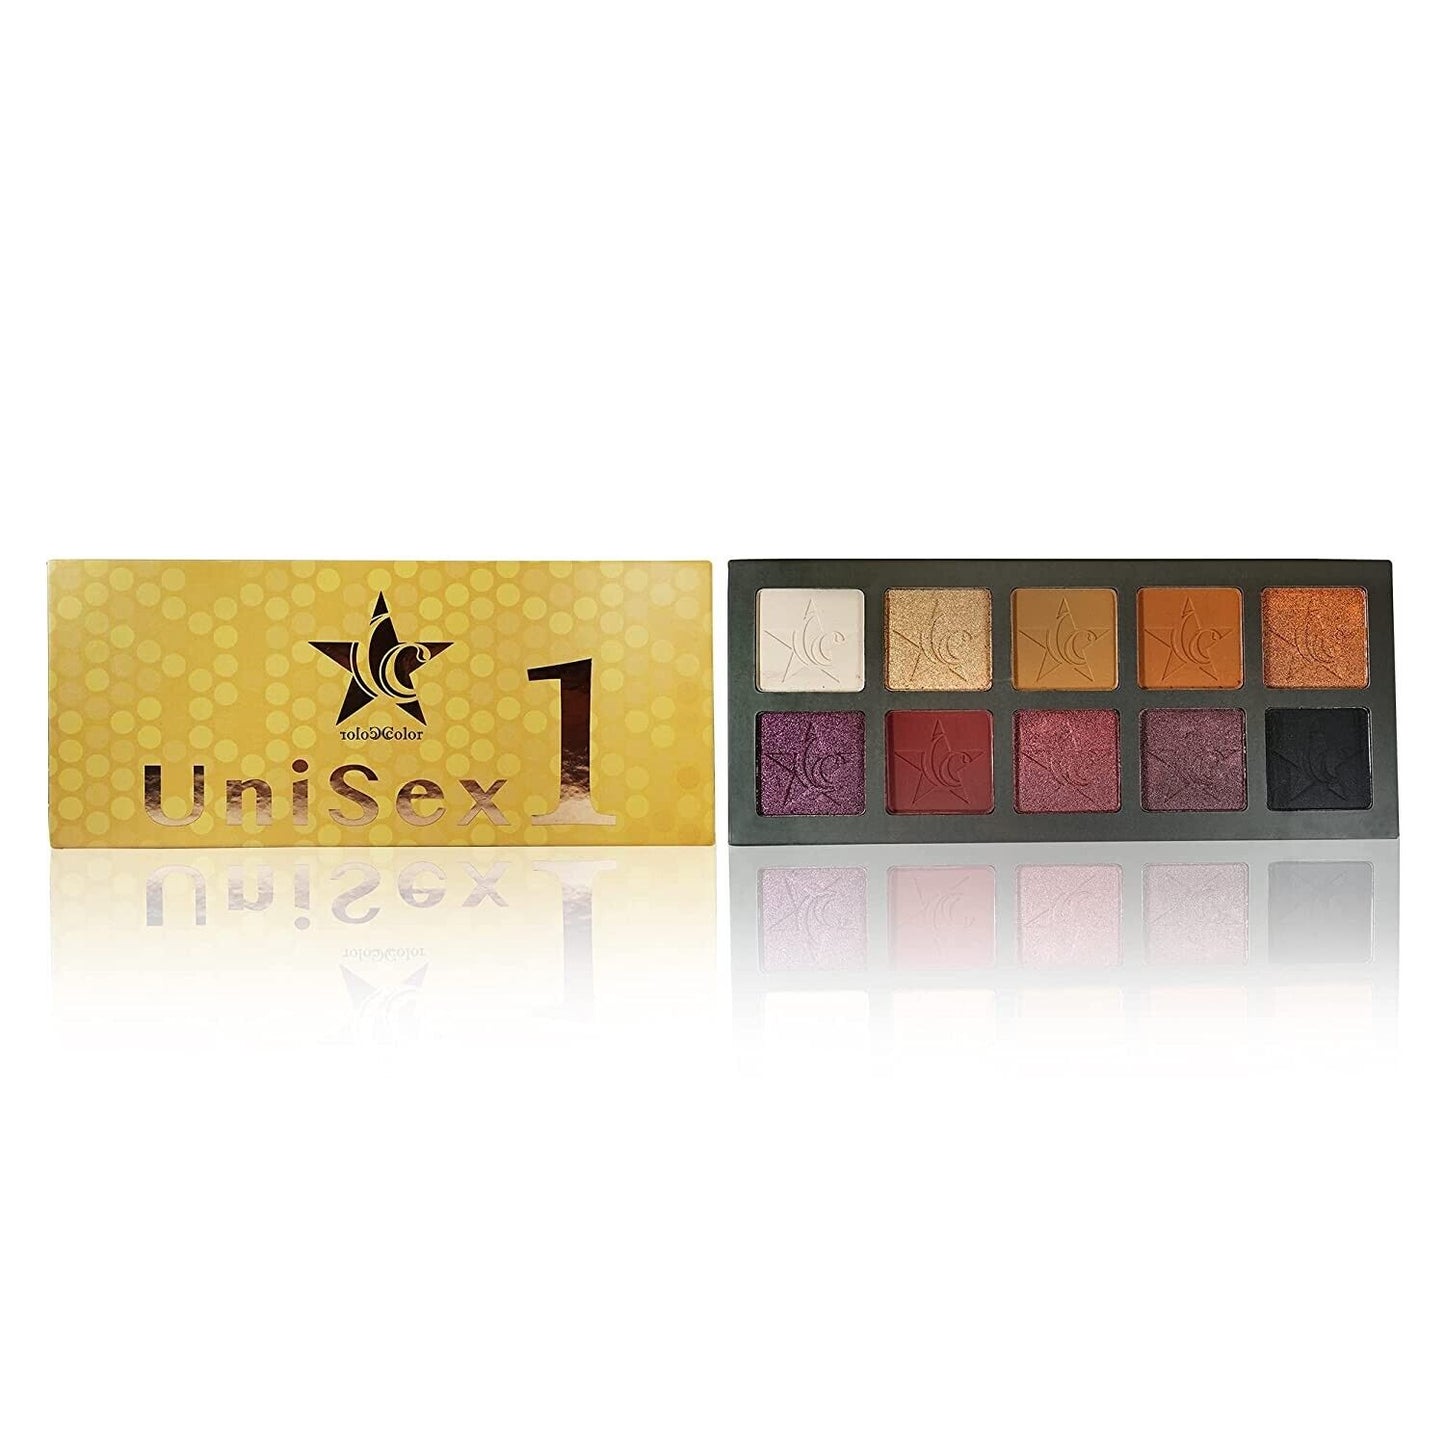 Ccolor Cosmetics - Unisex 1 - 10 Color Eyeshadow Palette, Highly Pigmented Eye